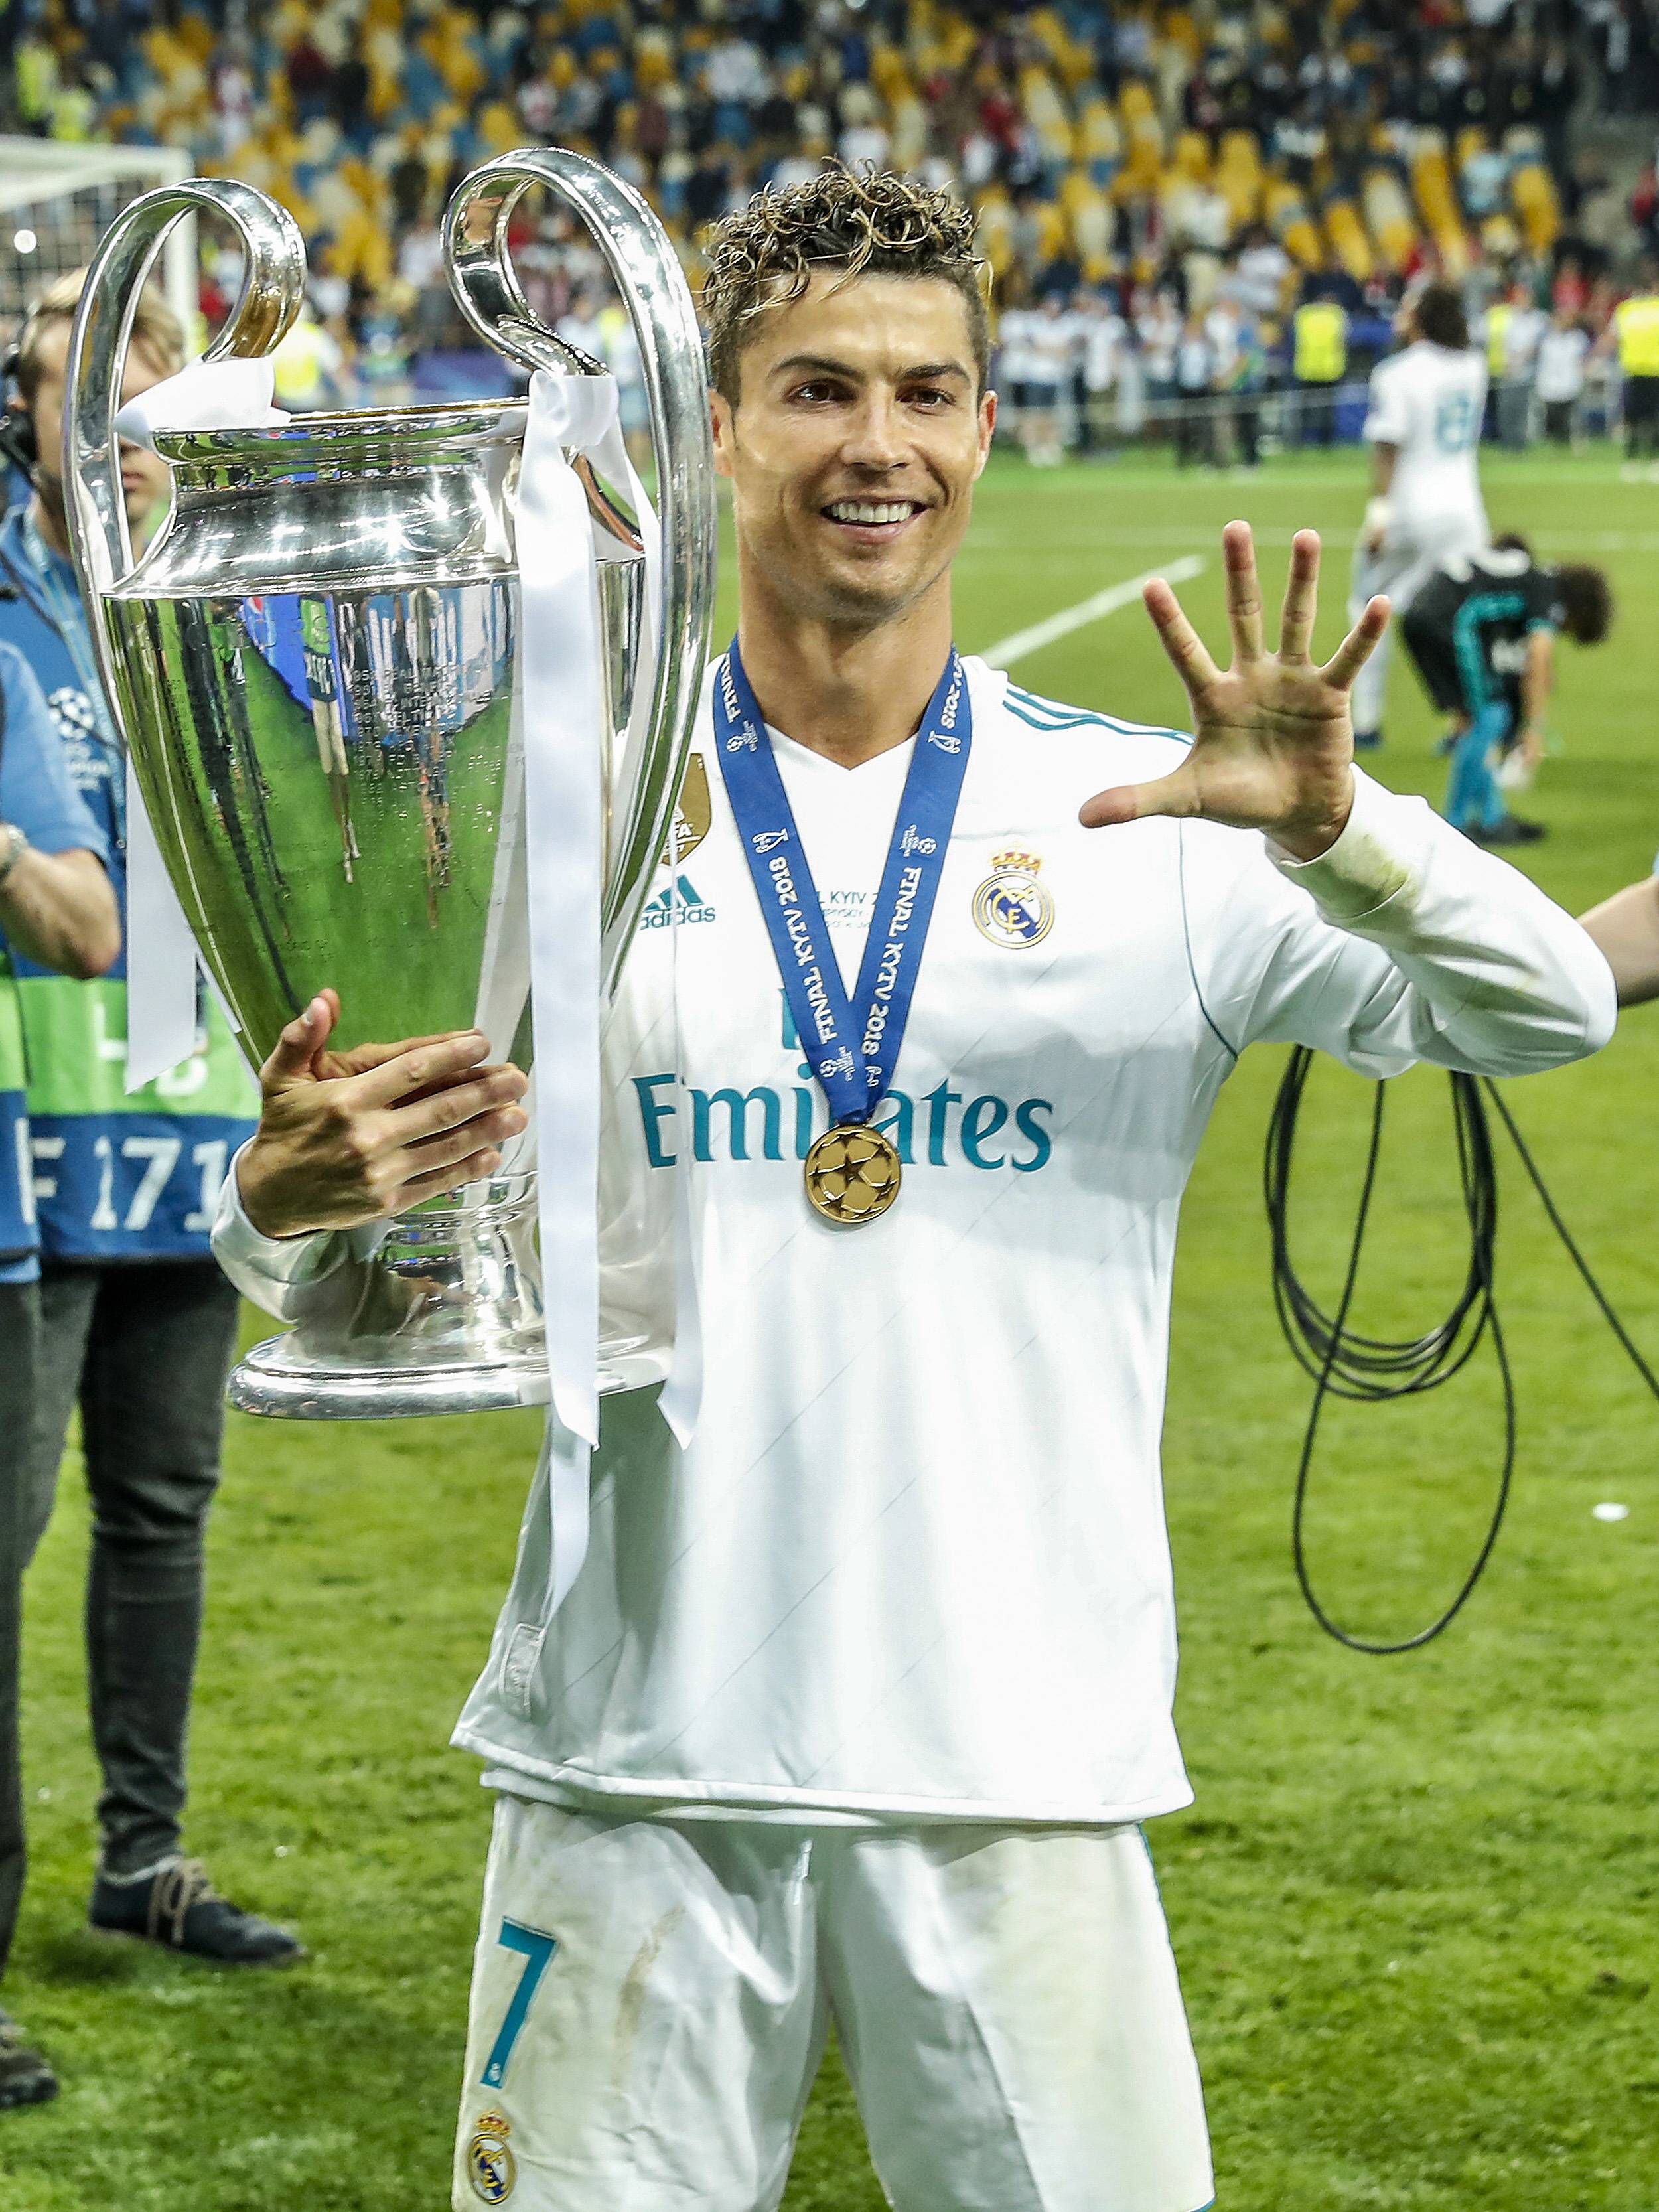 Cristiano Ronaldo has several UCL records including the most UCL records